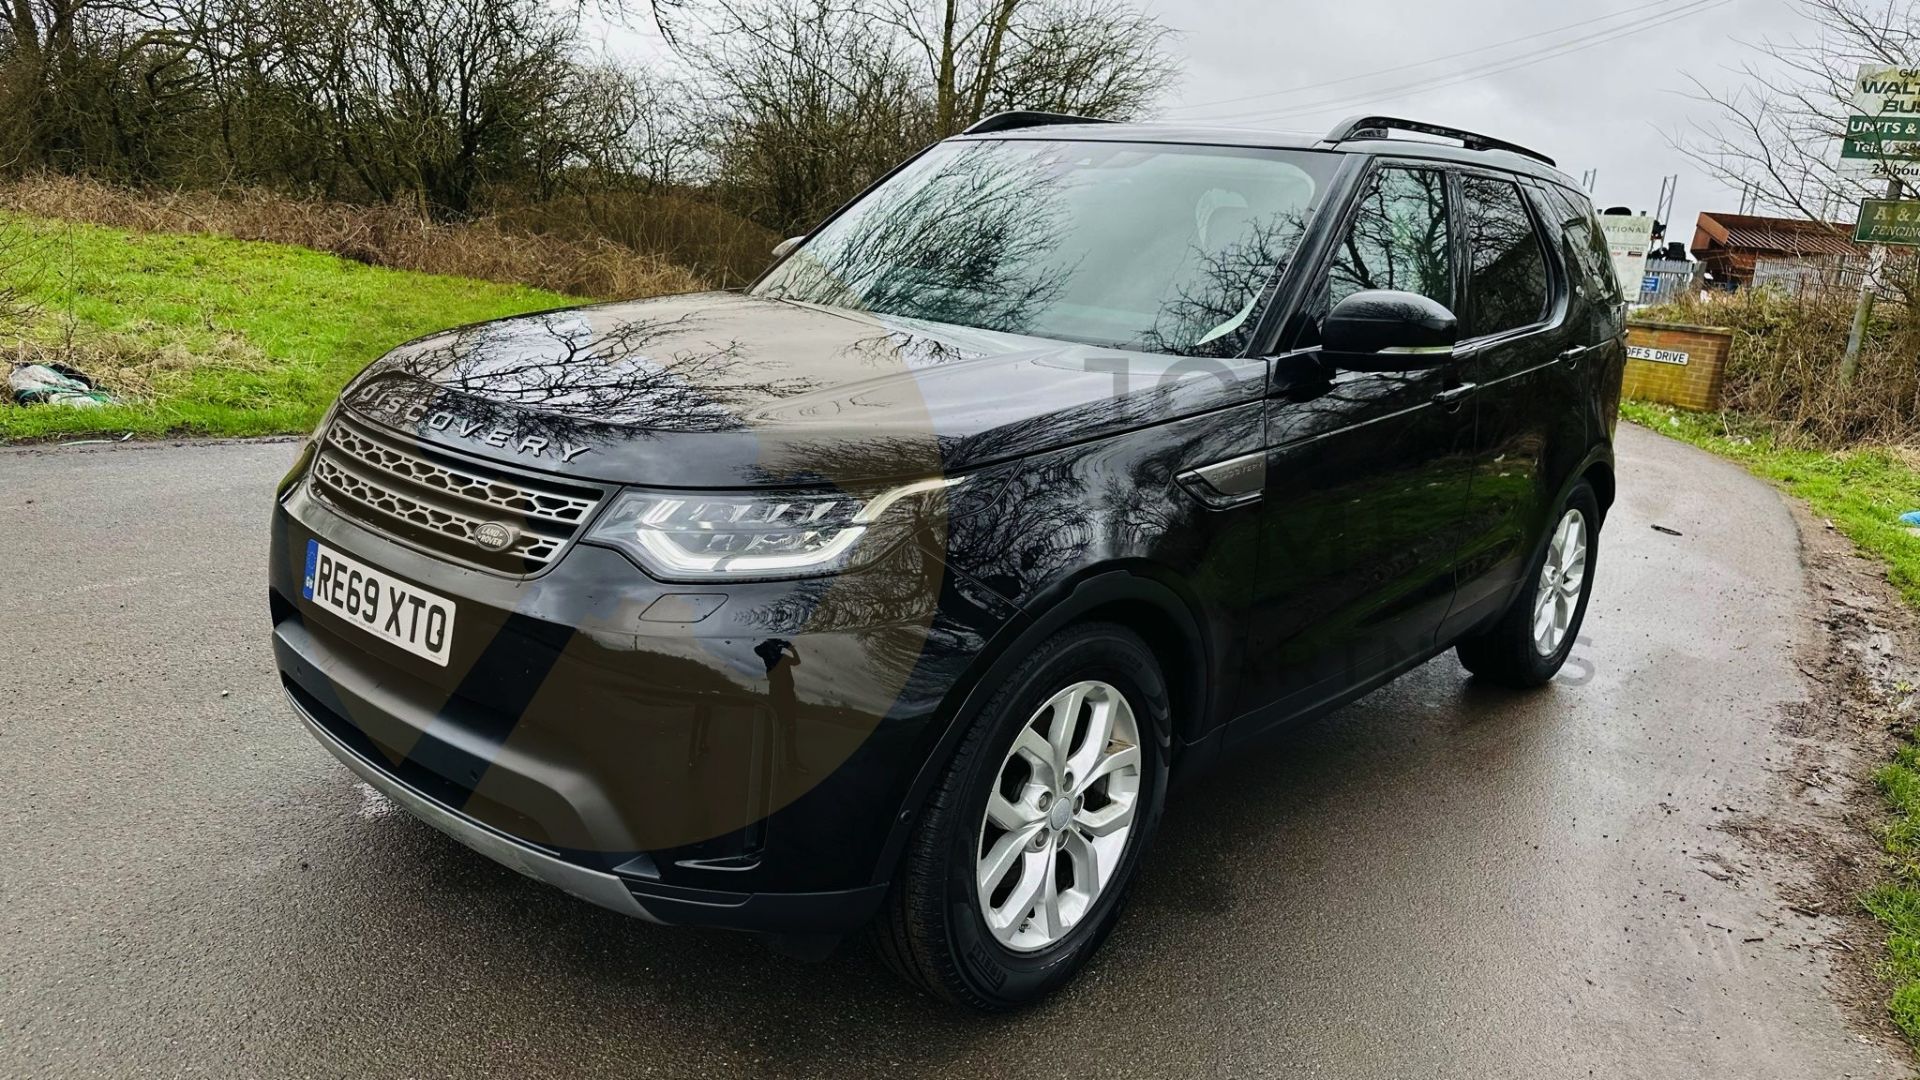 LAND ROVER DISCOVERY 5 *SE EDITION* 7 SEATER SUV (2020 - EURO 6 DIESEL) 8 SPEED AUTO *HUGE SPEC* - Image 7 of 57